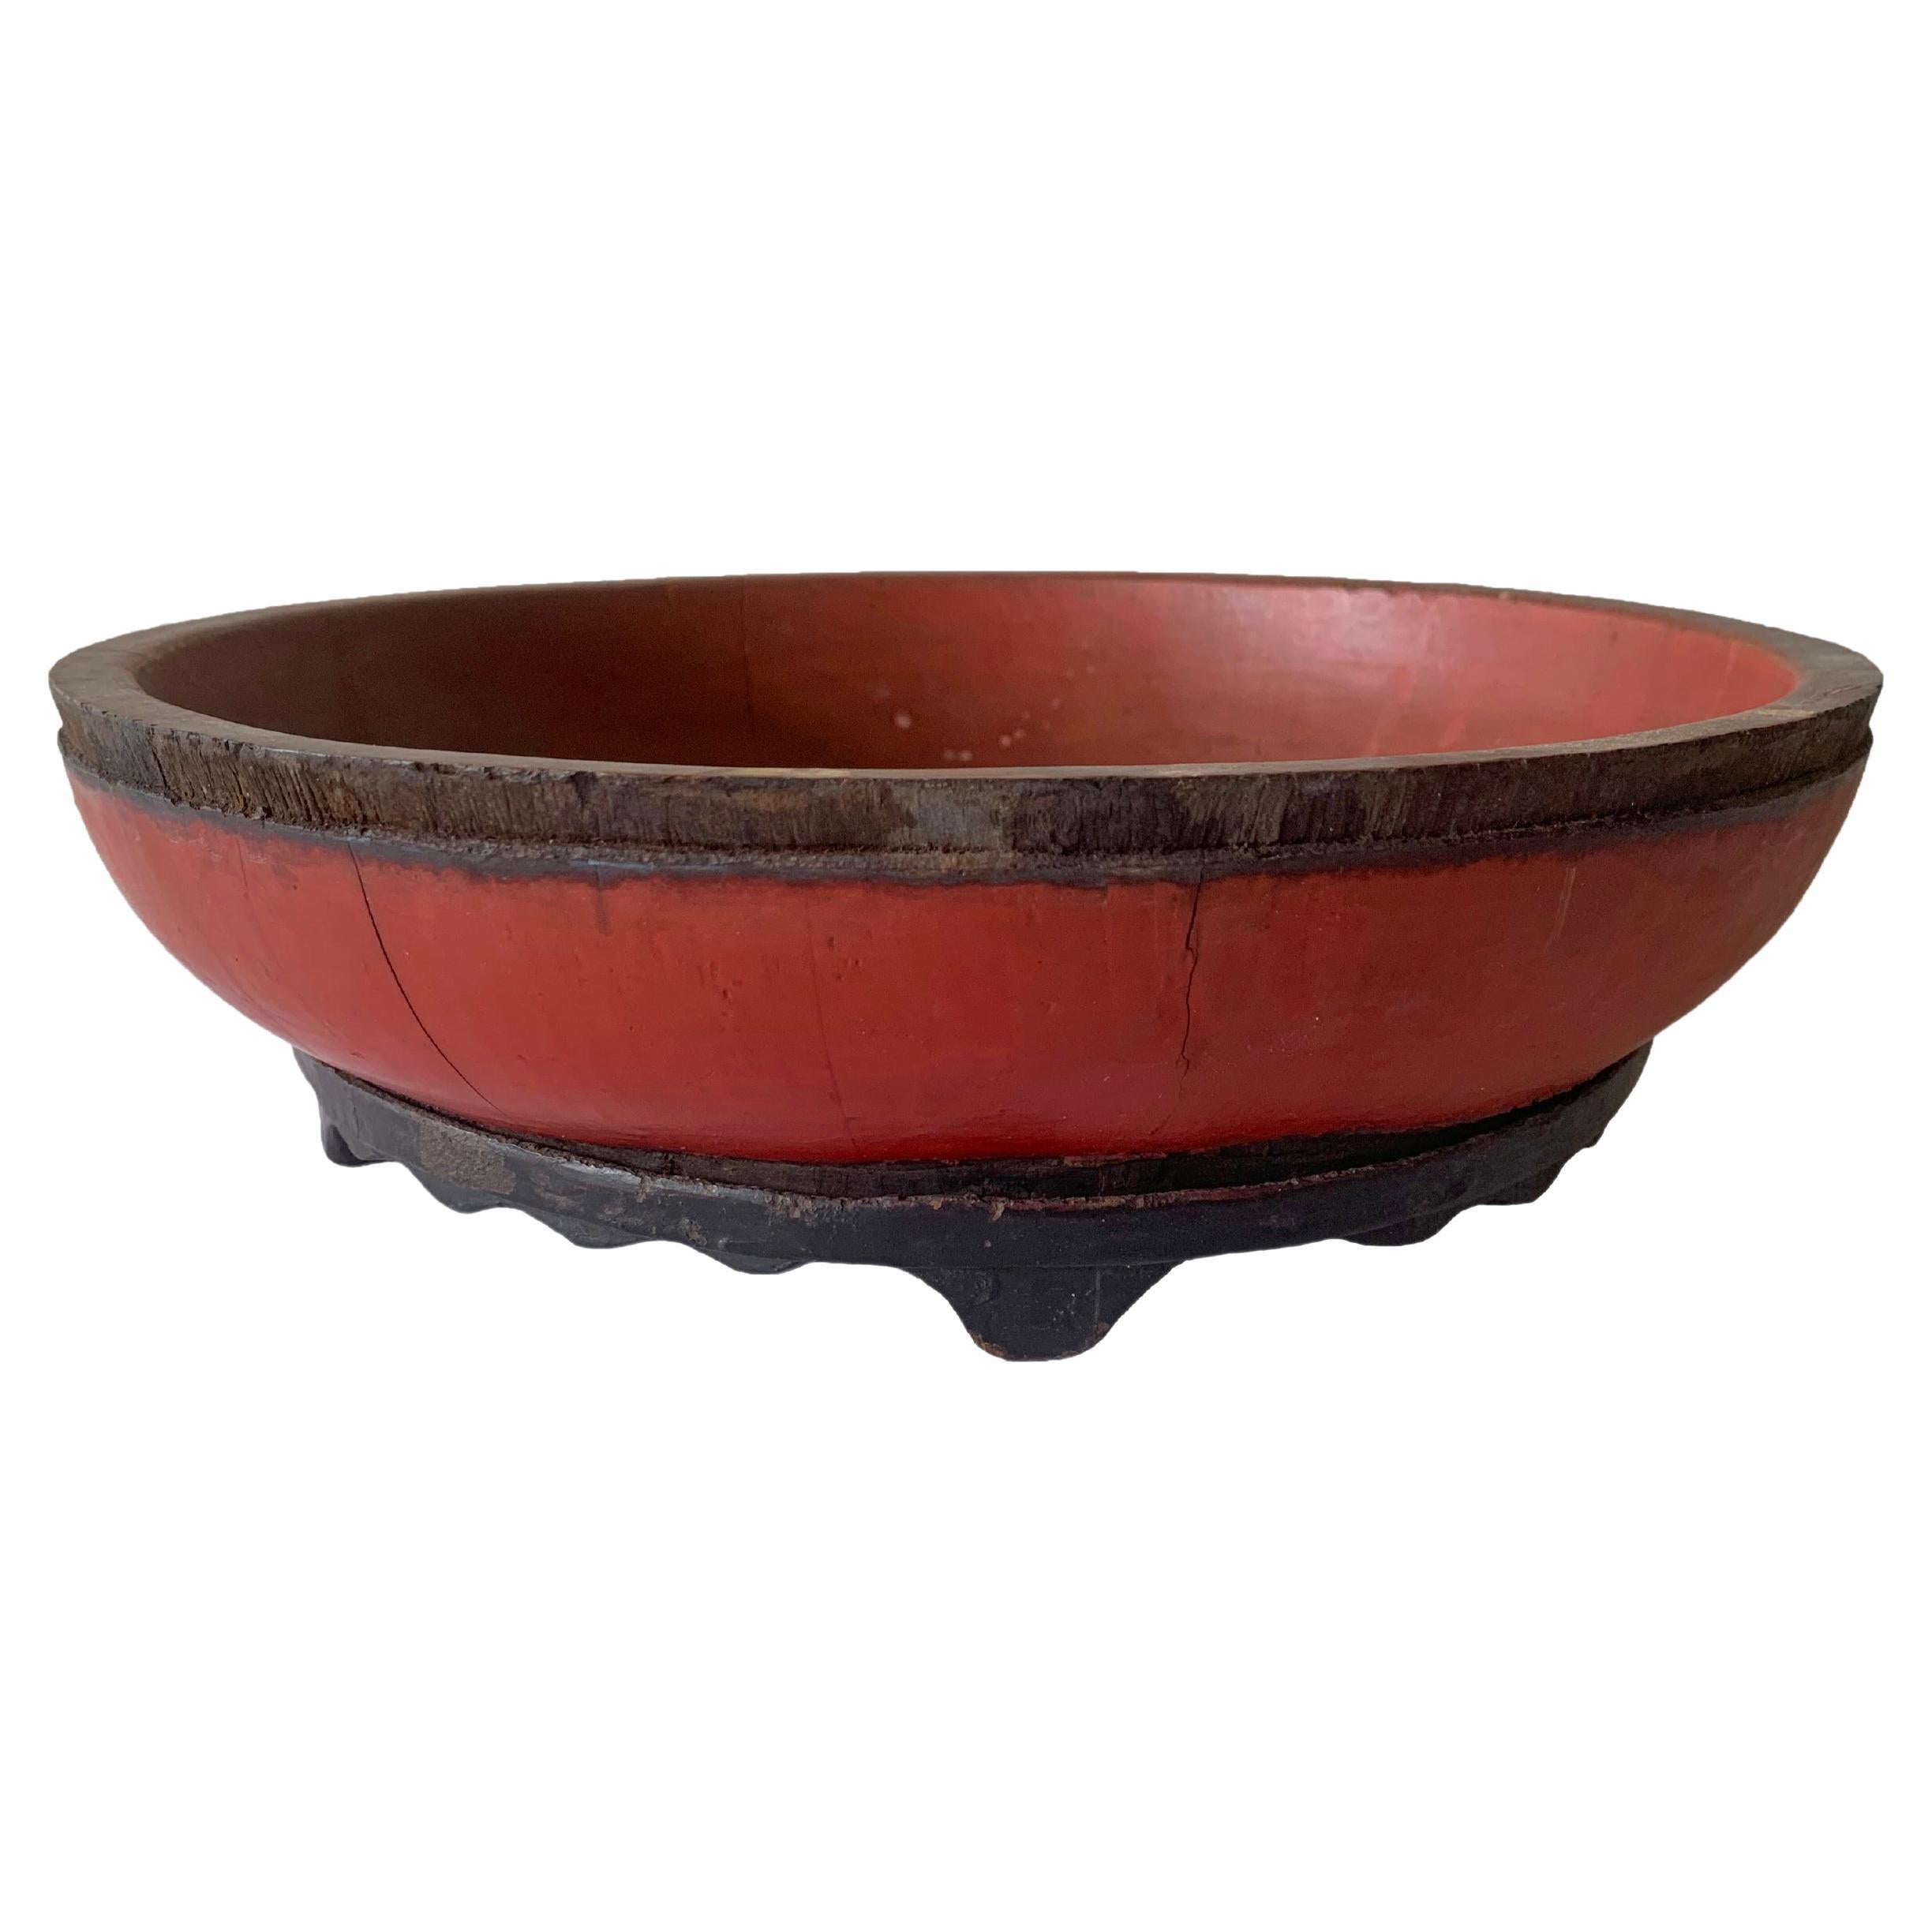 Chinese Red & Black Lacquer Wood Bowl, Mid-20th Century